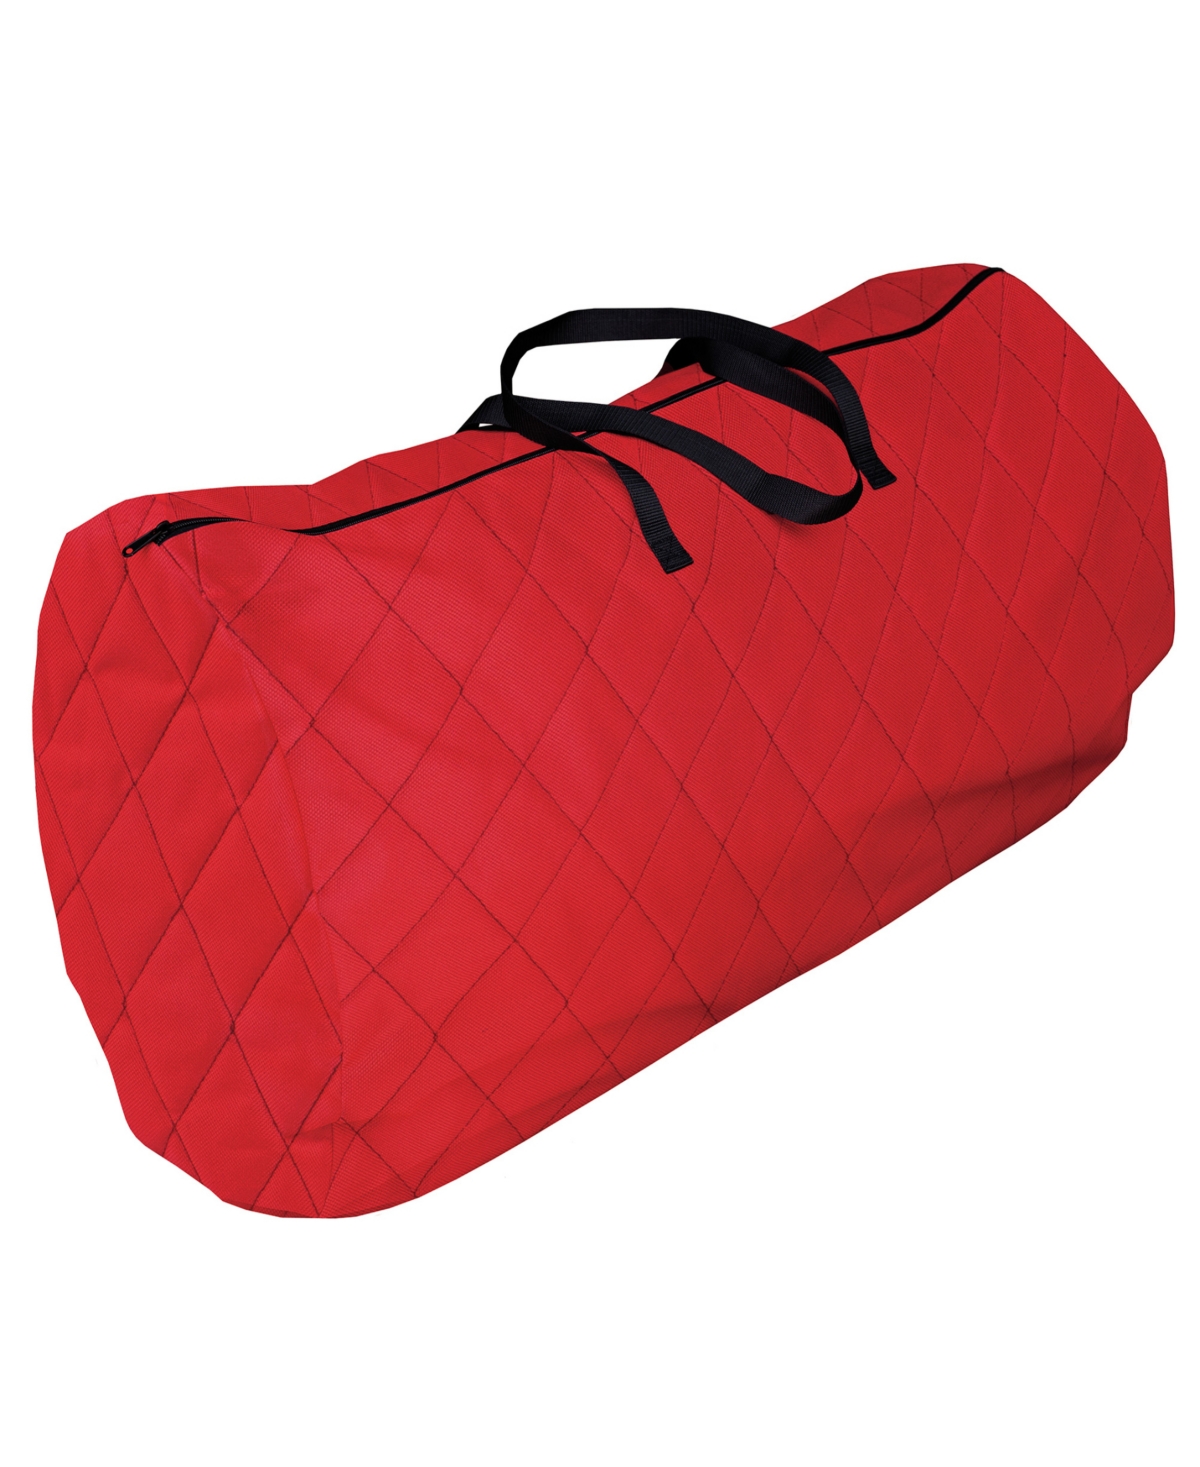 Quilted Multi-Use Large Holiday Storage Bag - Red